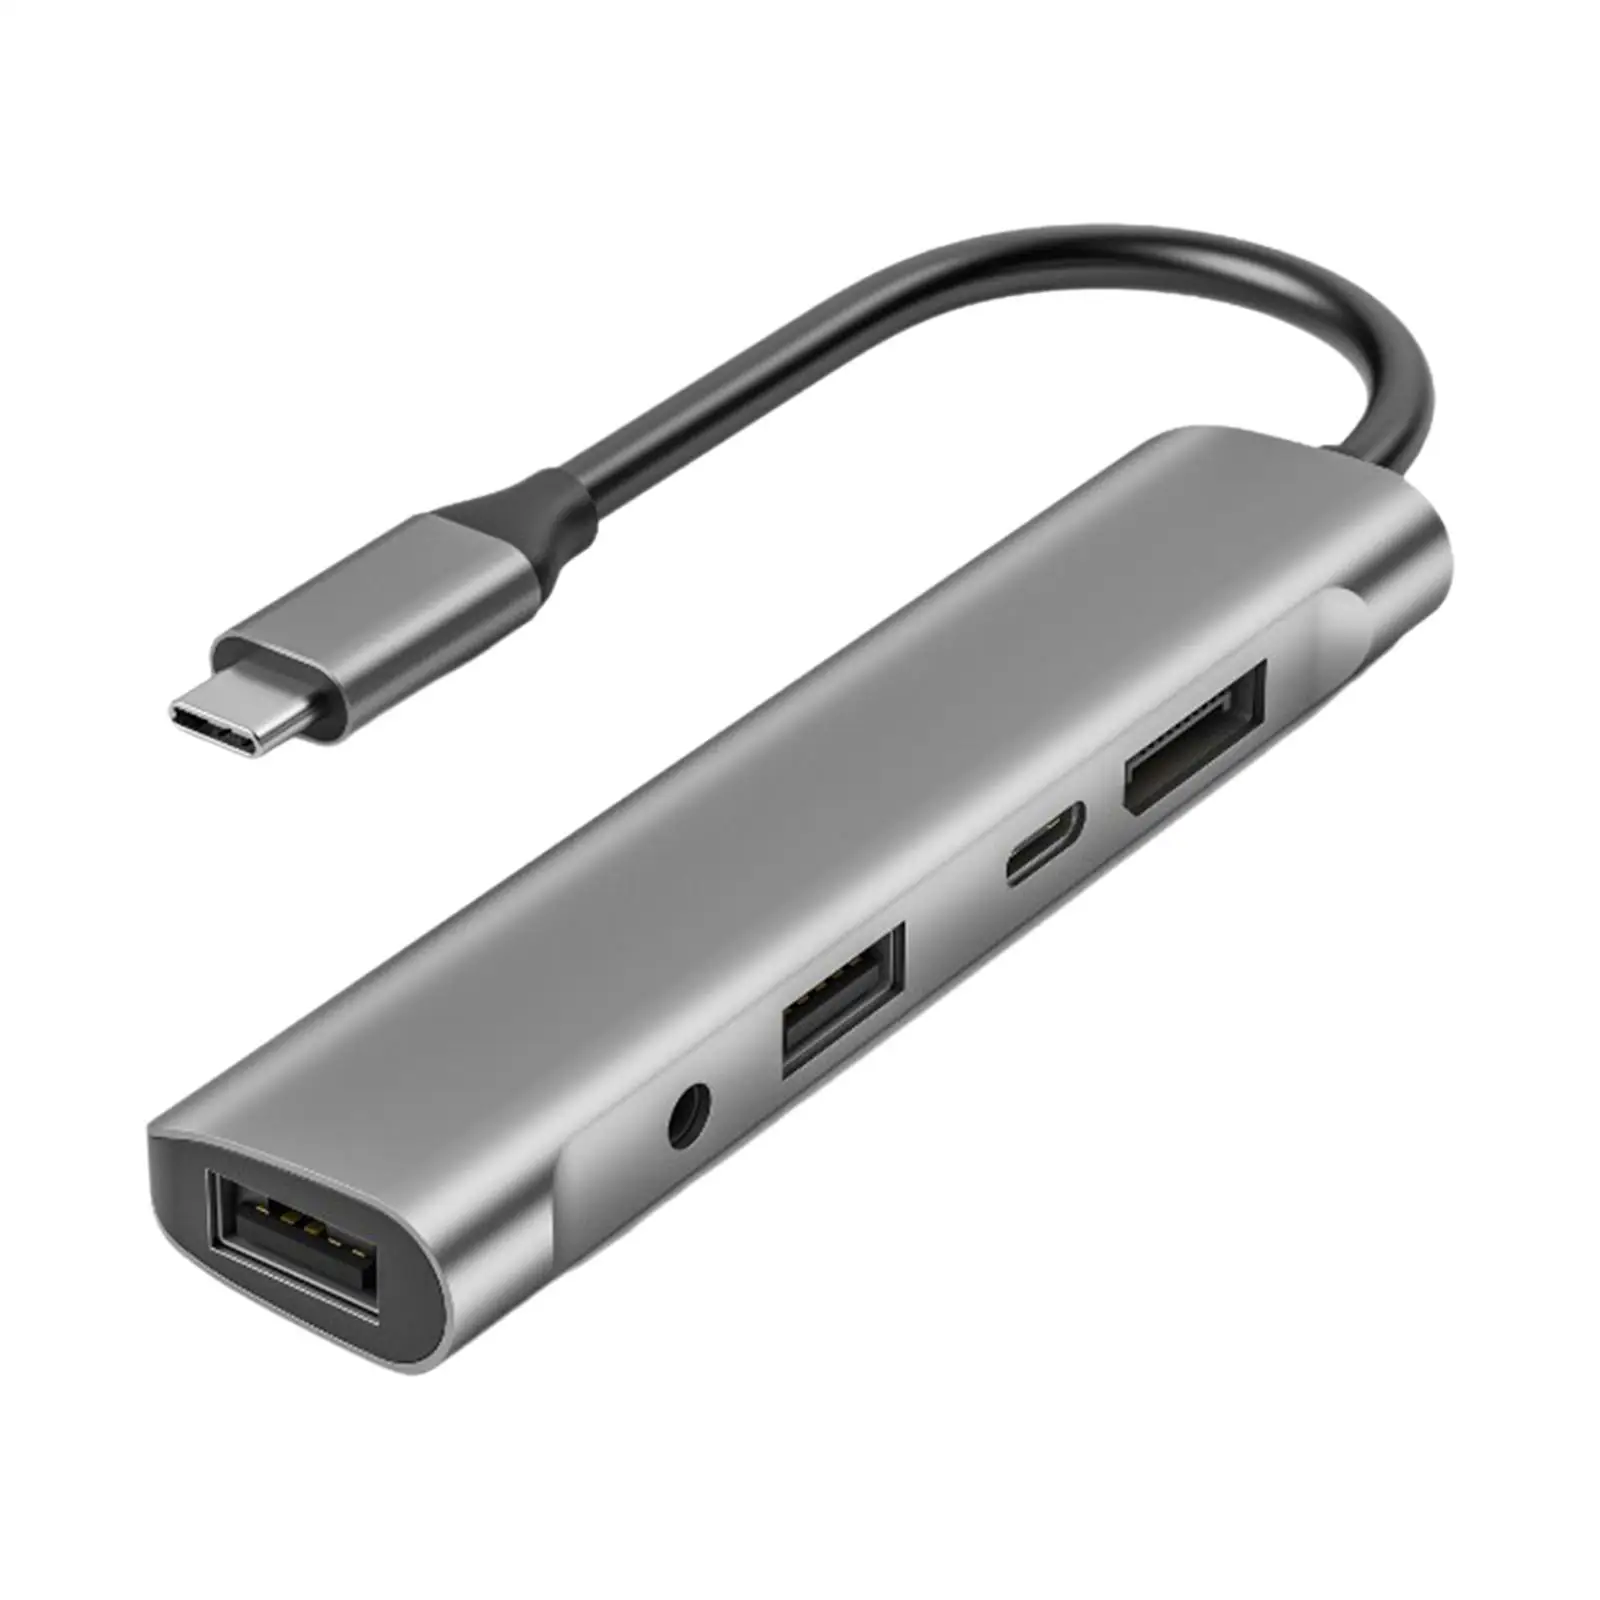 Portable 5 in 1 USB C Hub 3.5mm Jack 60W PD Charger 4K@60Hz DisplayPort Slim Multiport Adapters for Laptop Projector Microphone